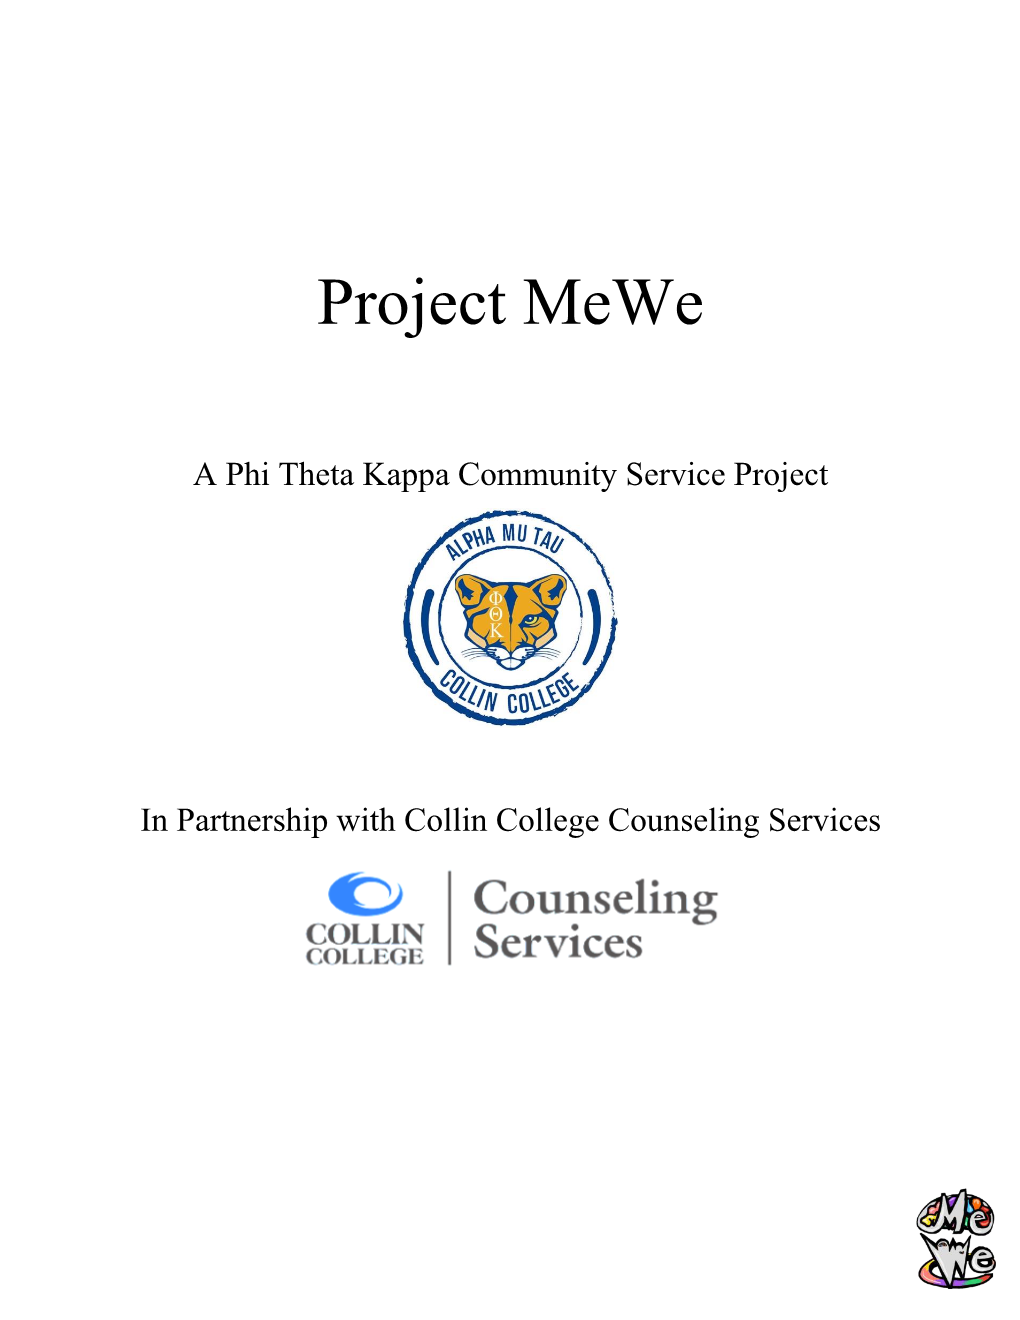 Project Mewe